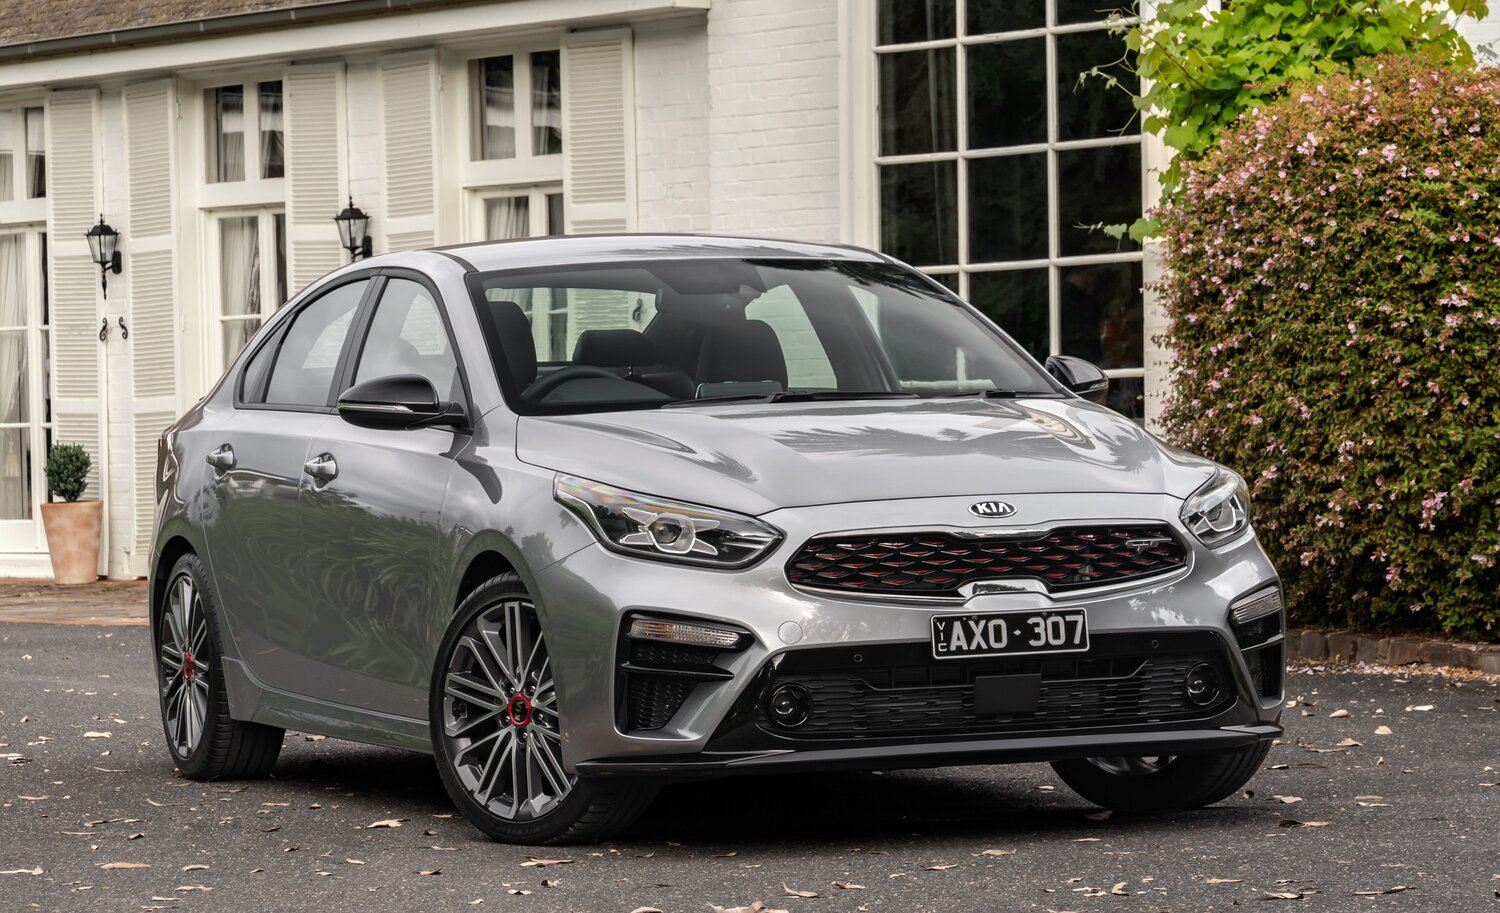 2020 Kia Cerato Review Buyer S Guide Auto Expert By John Cadogan Save Thousands On Your Next New Car